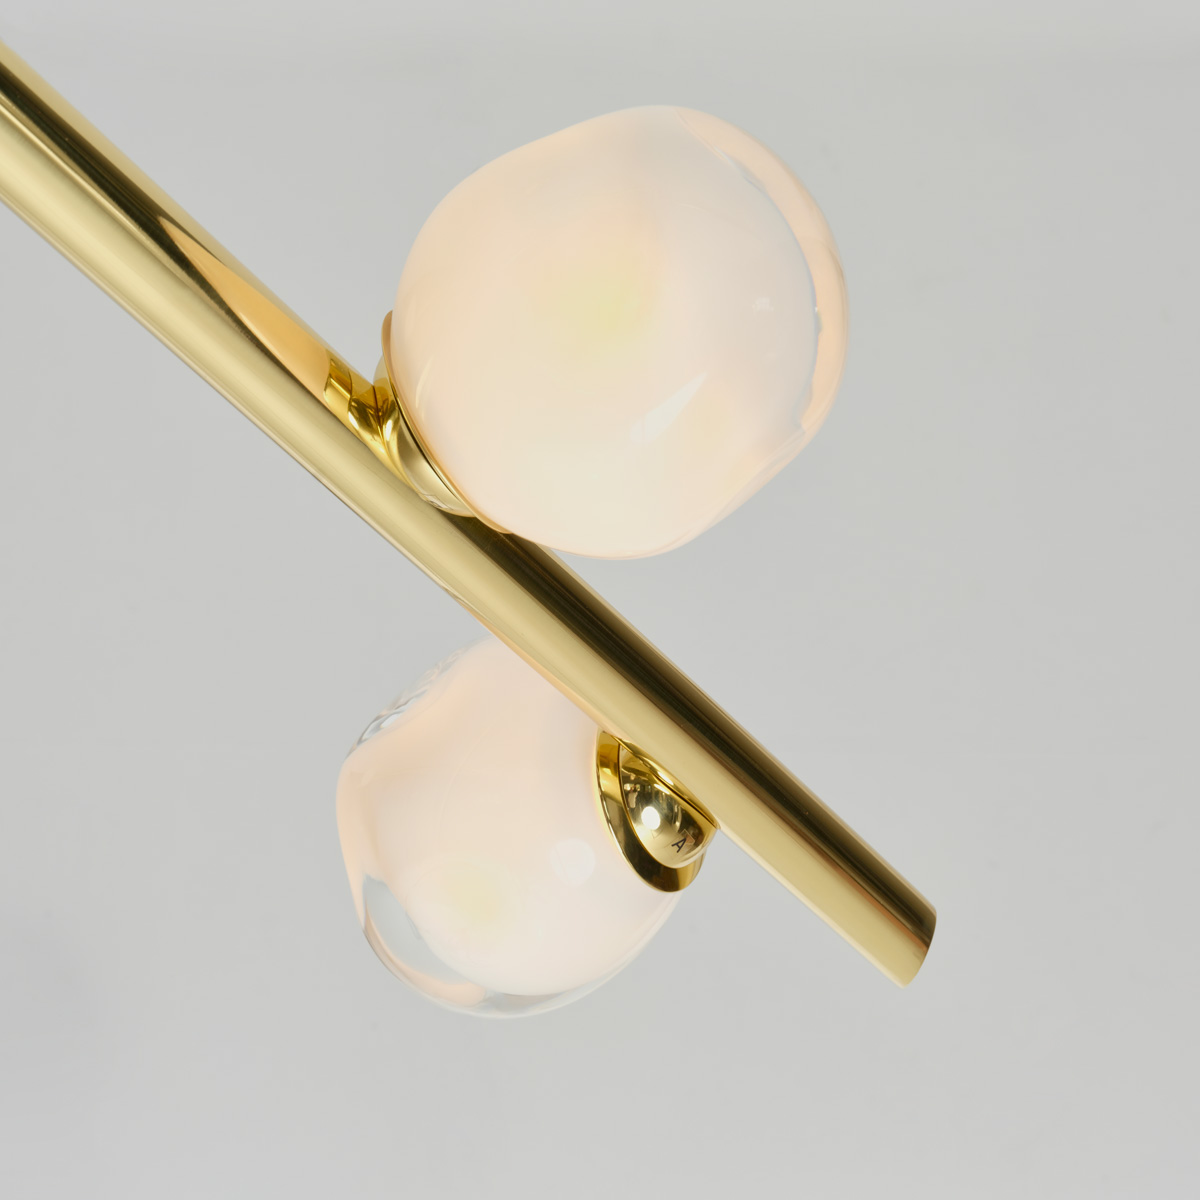 Antares X3 ceiling light by gaspare asaro